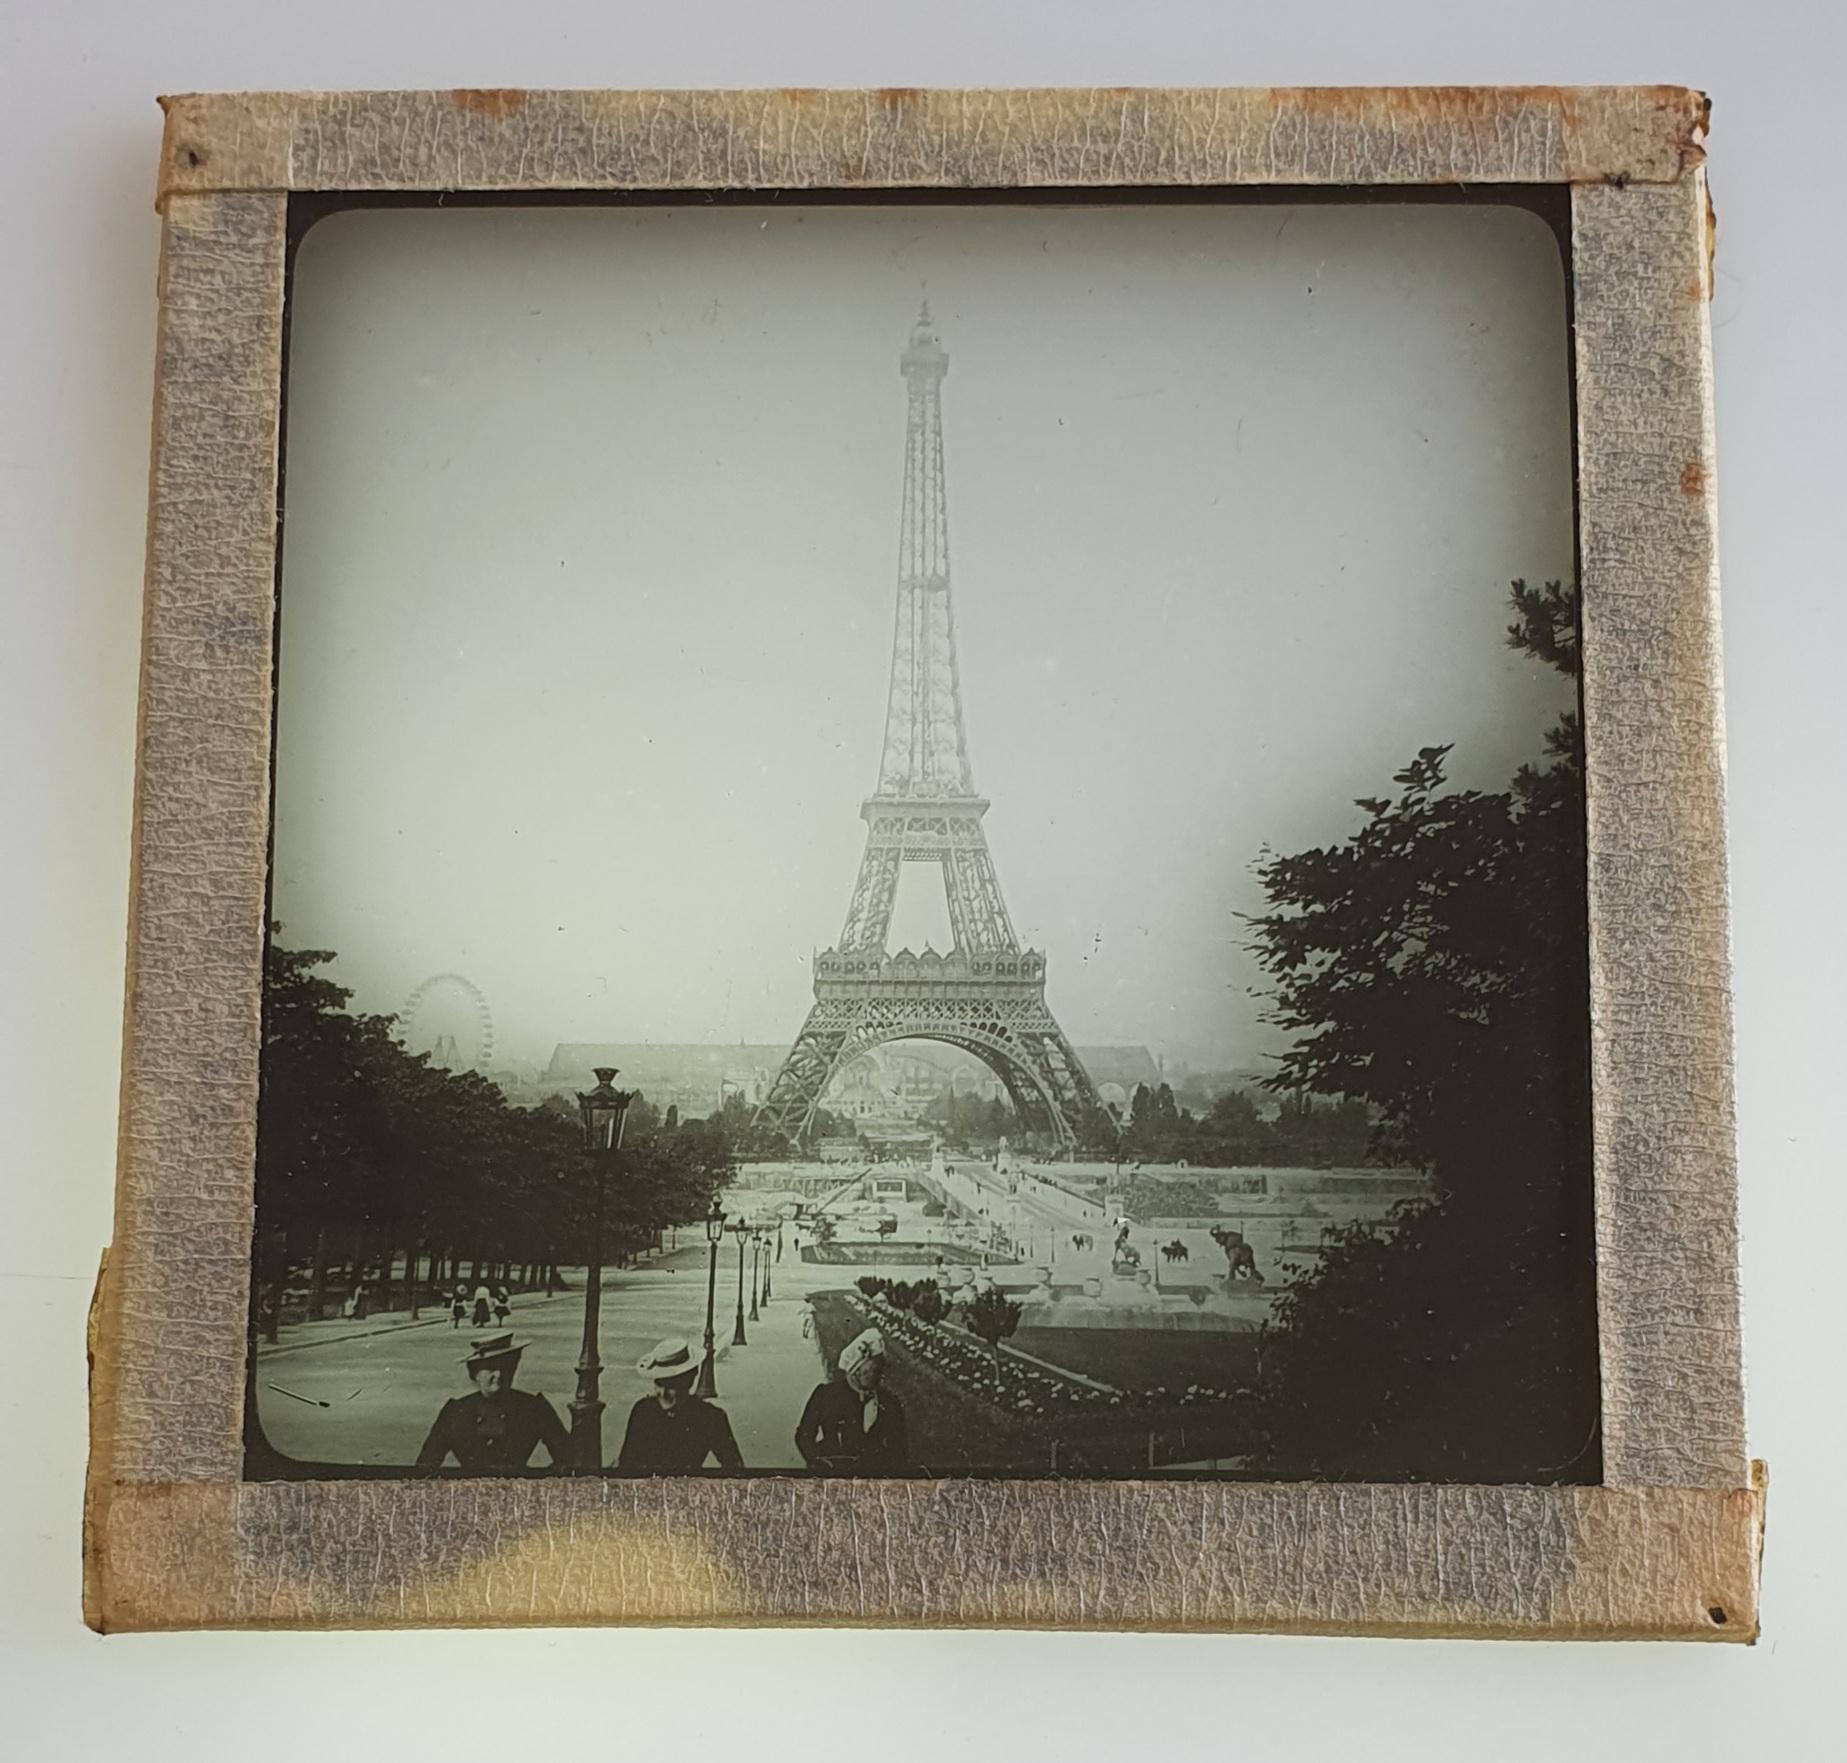 16 Antique glass lantern slides with motifs of France.

1. Paris, Eiffel Tower. With three people in the front of the photo.
2. Paris, Eiffel Tower. View from the lake with boat in front of the photo.
3. Paris, Arc de Triomph. Has a scratch, see